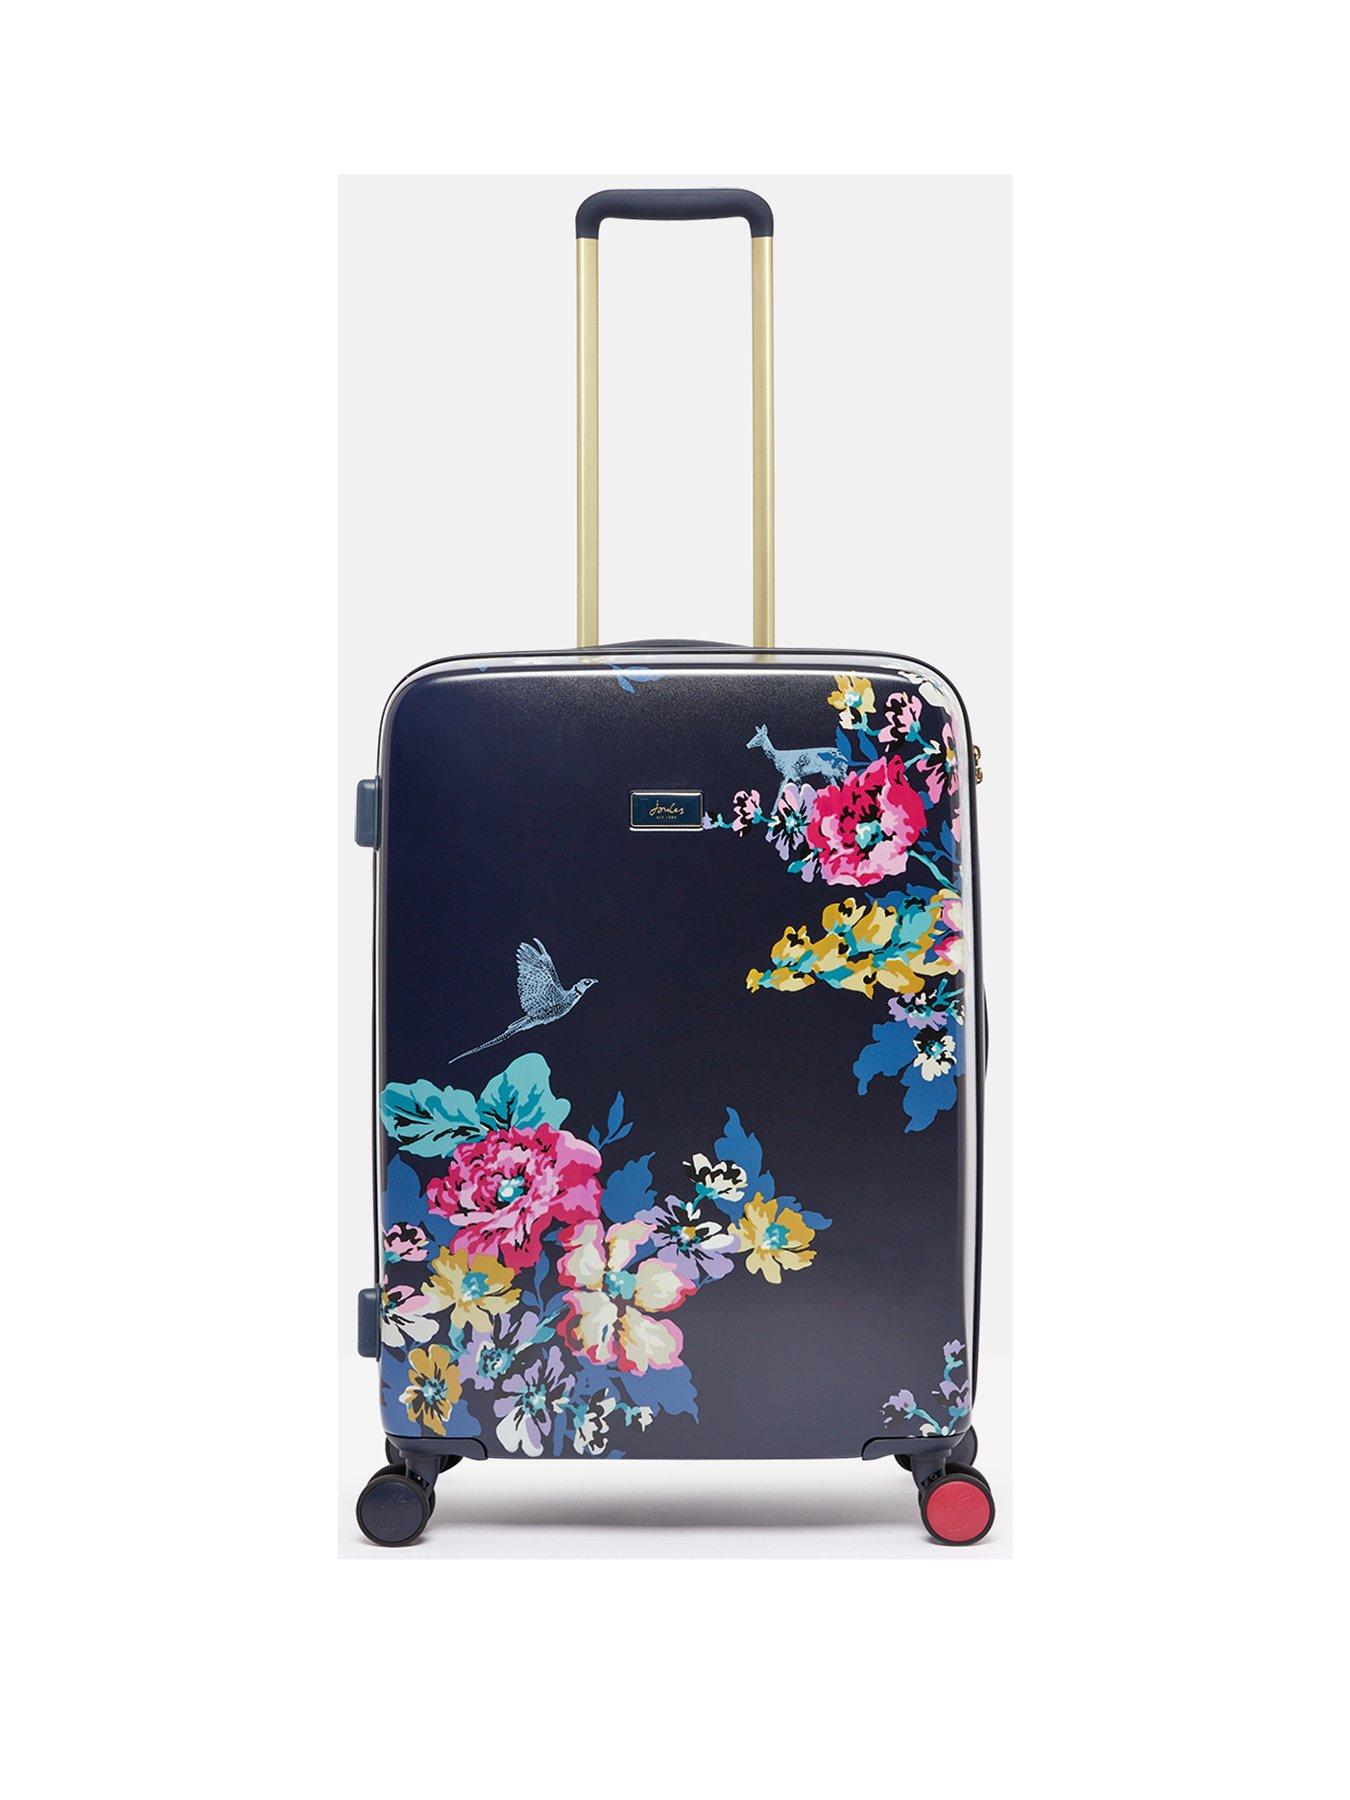 Joules CAMBRIDGE FLORAL LARGE TROLLEY SUITCASE | very.co.uk